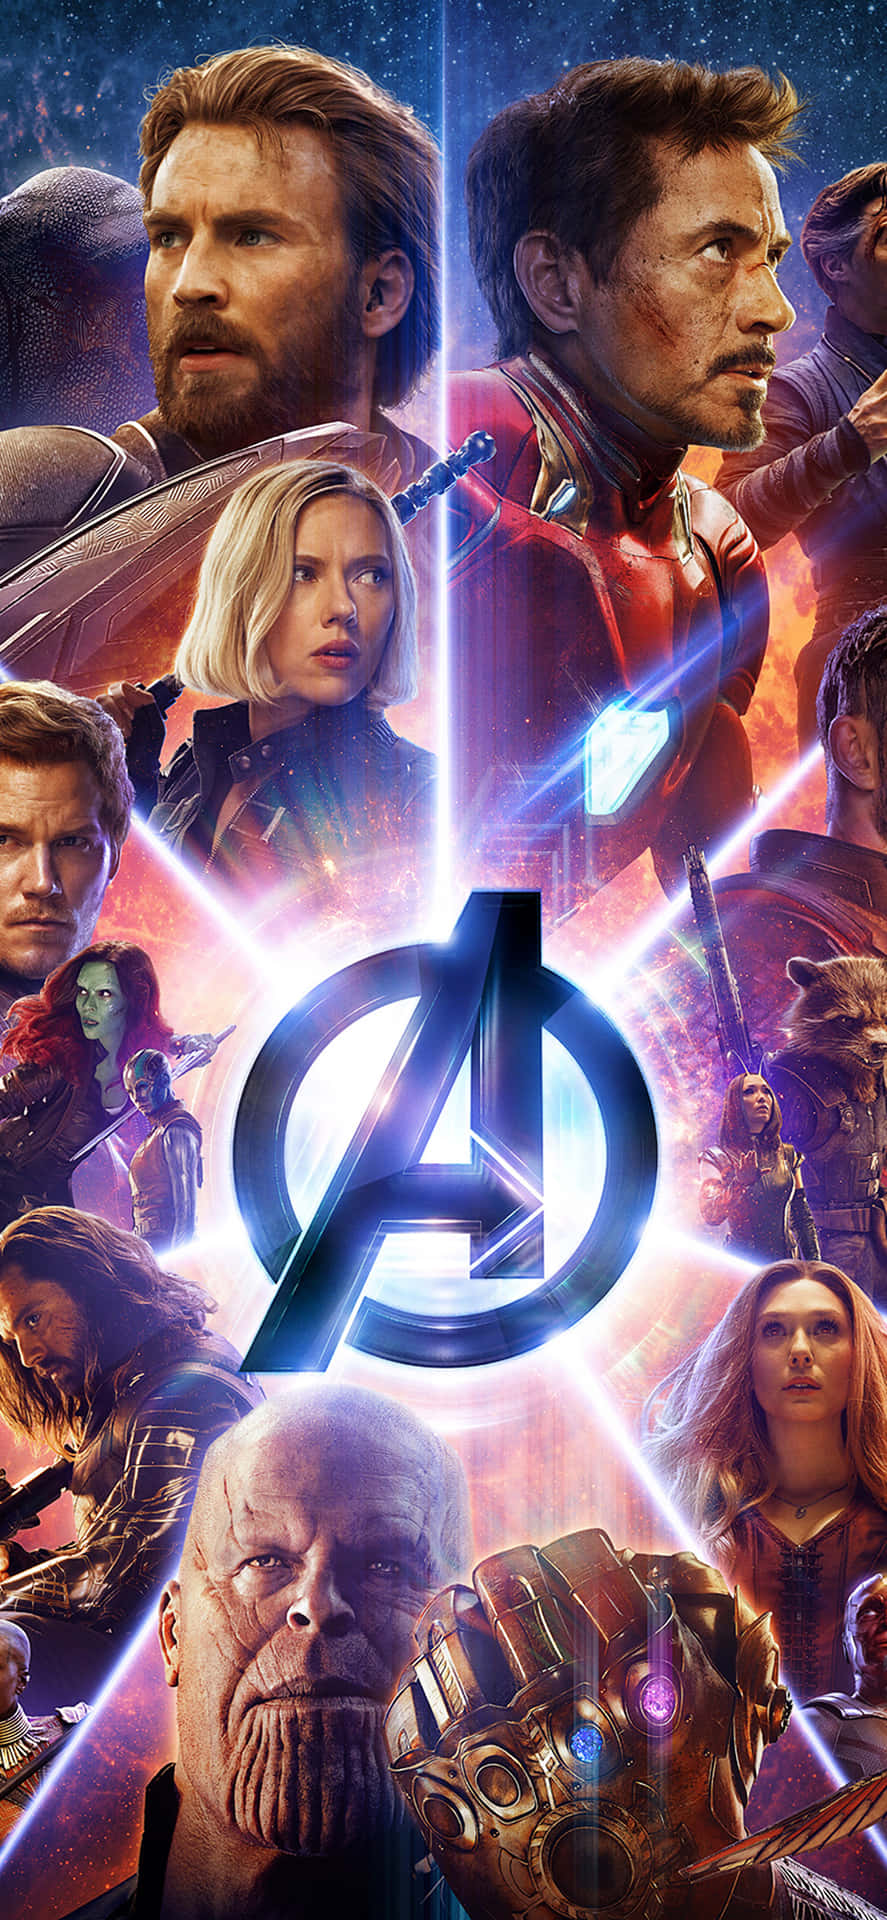 Fight the Dark Side with the All-New Avengers iPhone Wallpaper